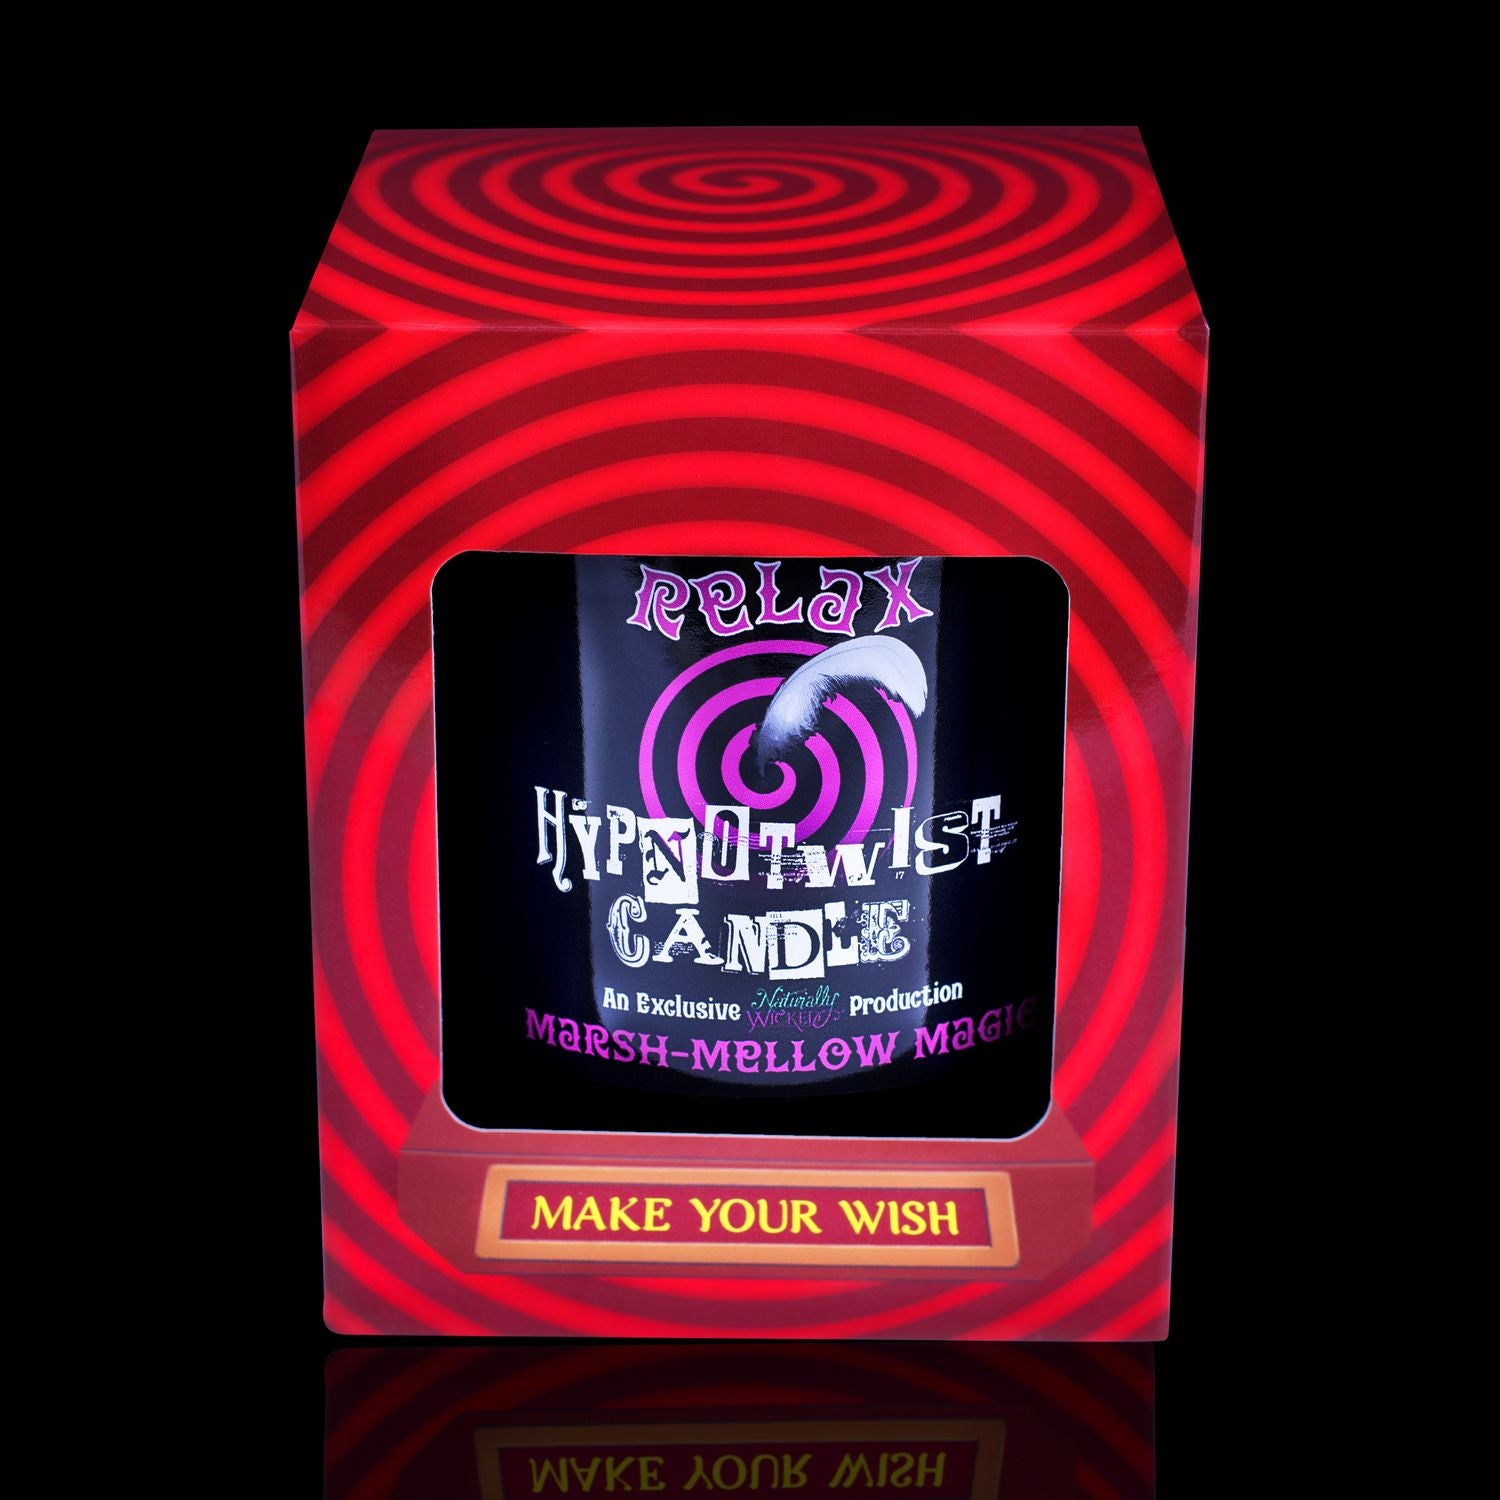 Make Your Wish With The Naturally Wicked Hypnotwist Relax Candle, Plant-based Soy Pink Wax Scented With Marsh-Mellow Magic, Including A Rose Quartz Crystal Spinning Top, Mirrored Lid & Red Circus Hypnotic Gift Box